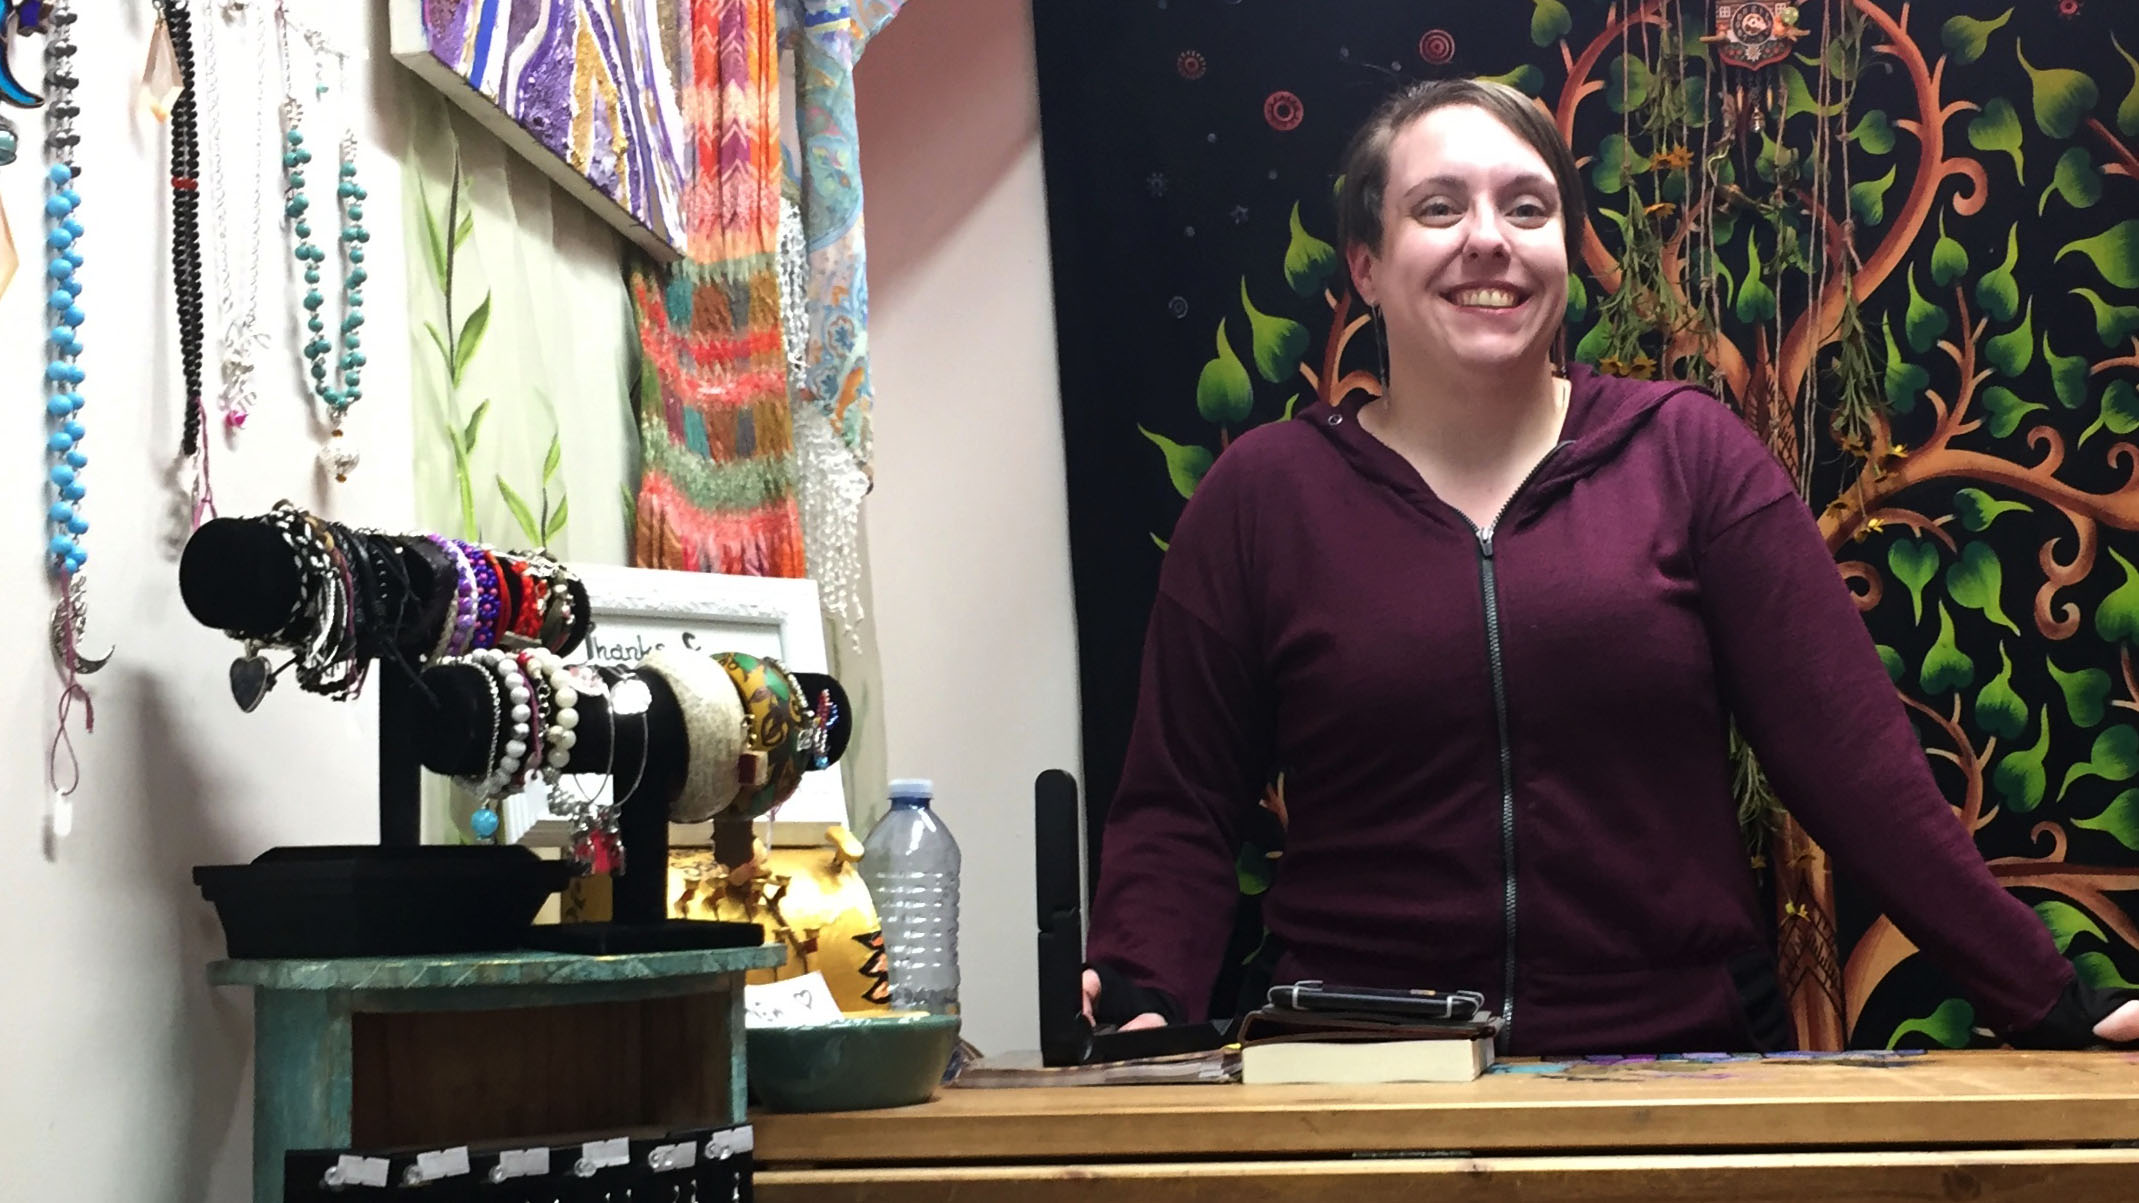 After briefly closing her doors at the end of August, Jacquelyn Miccolis has reopened and expanded Sparkles n’ Sawdust.